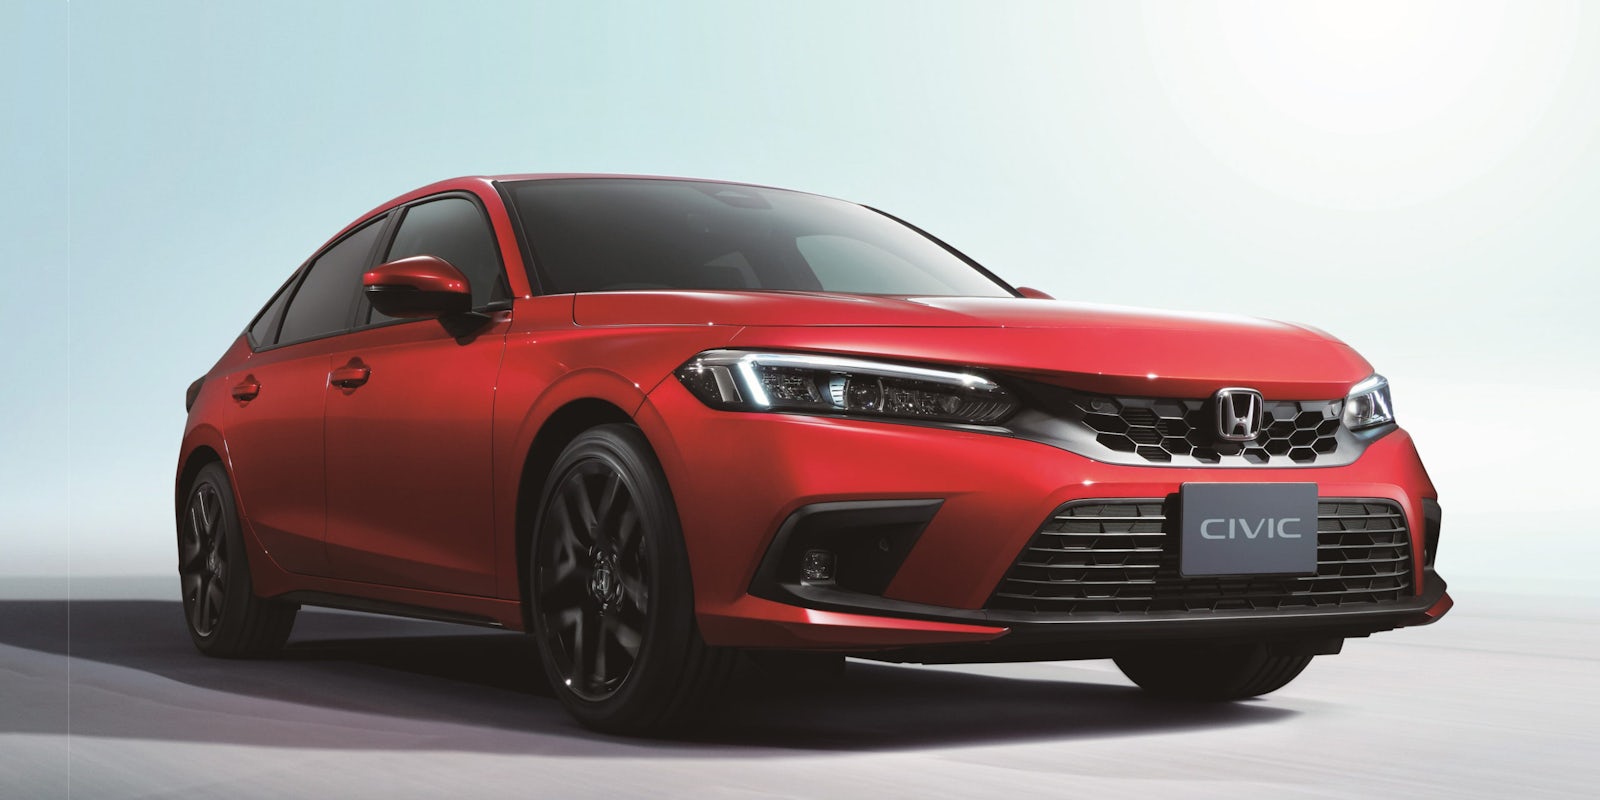 New Honda Civic hatchback hybrid revealed: prices, specs and release